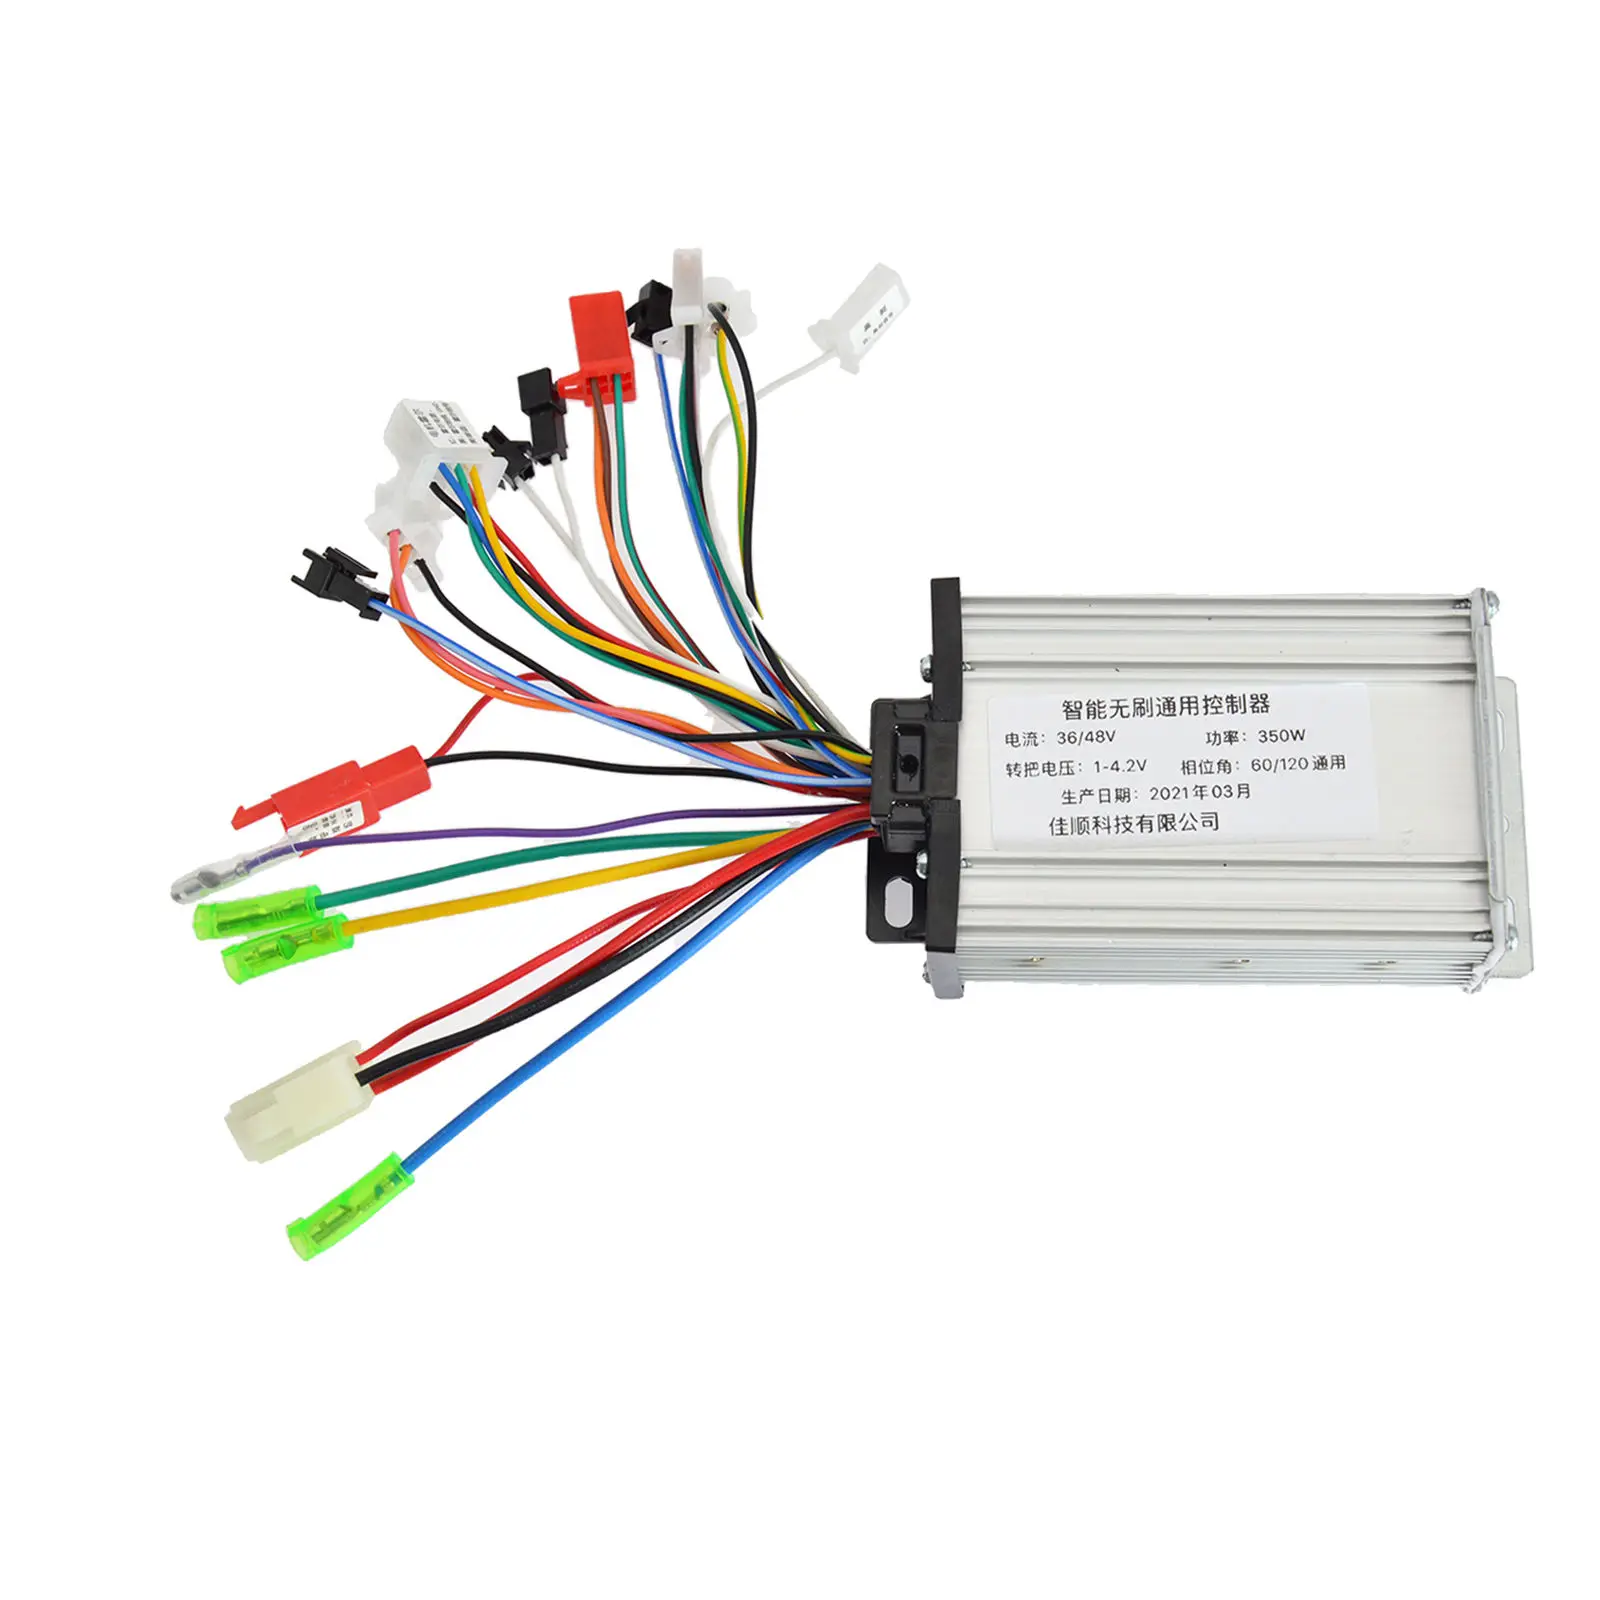 36V/48V 350W Electric Bicycle Controller E-scooter Skateboard E-bike Brushless DC Motor Speed Controller Control Box